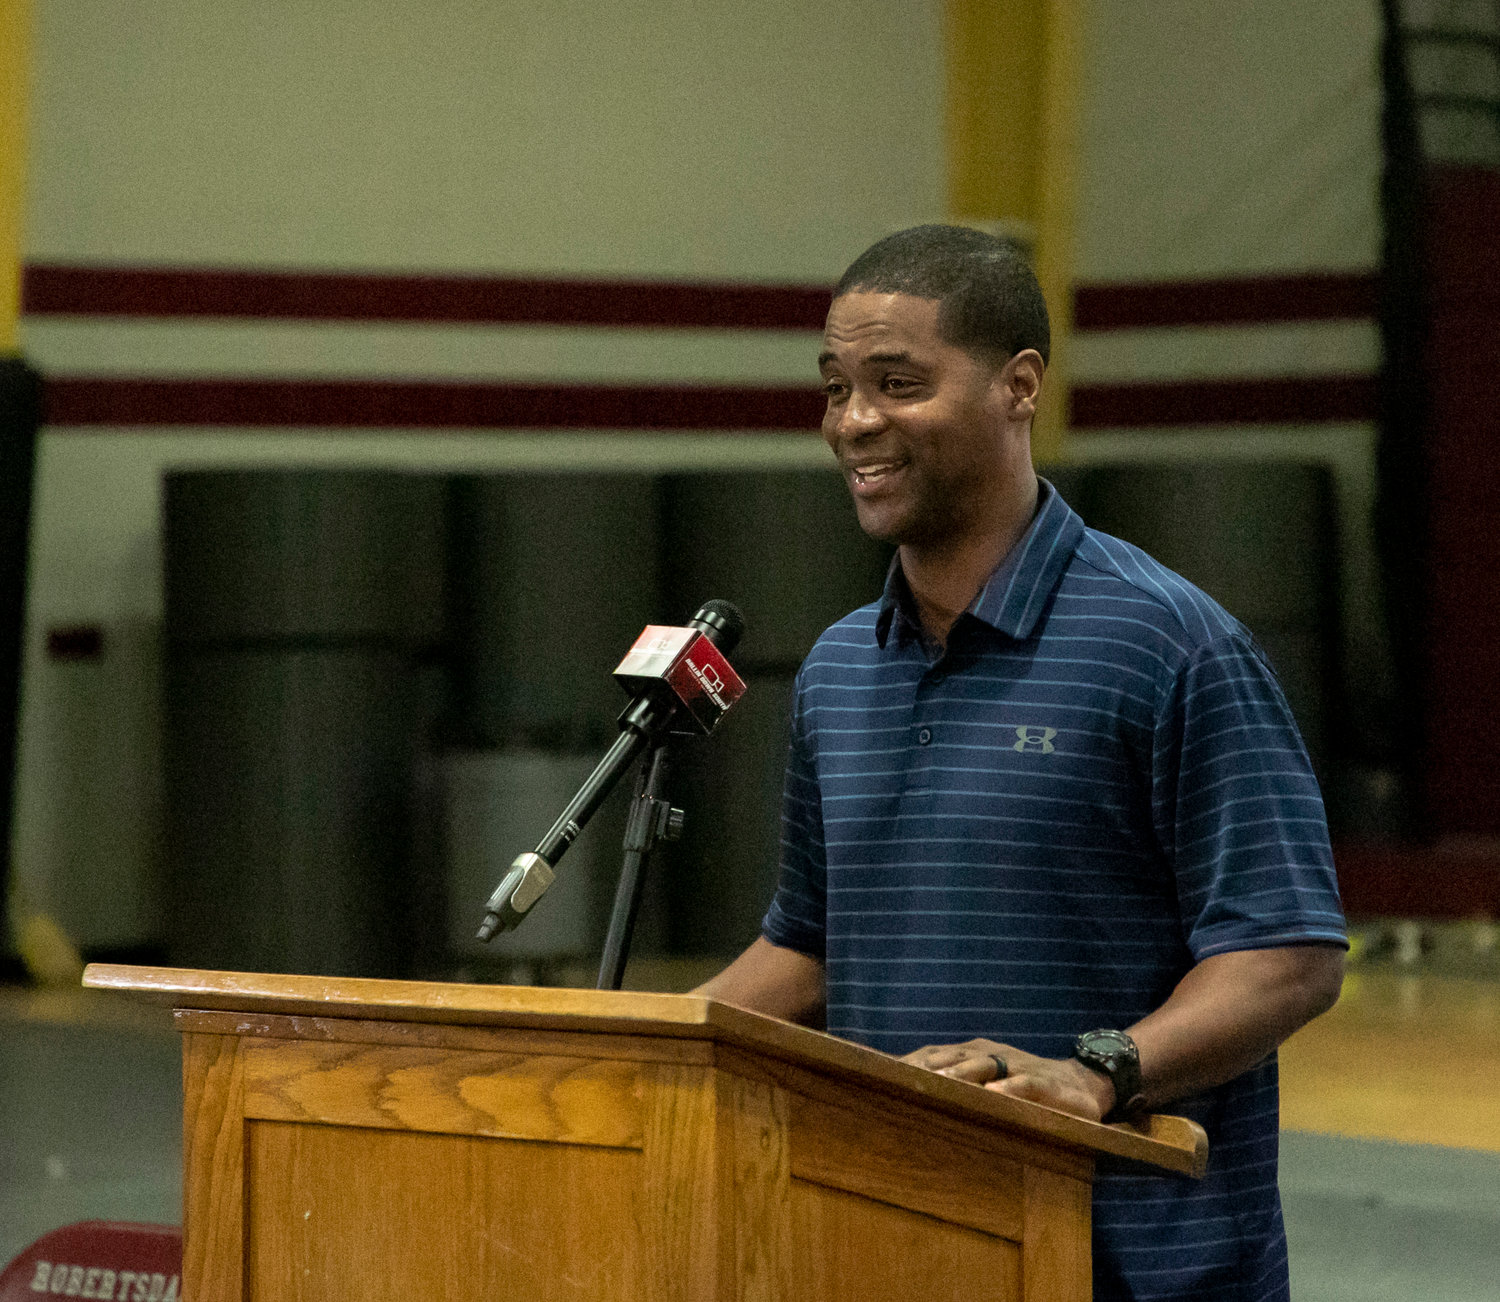 First year Foley head boys' basketball coach Kason Whitten took the podium and represented the Lions at Ballin Down South's media day event at Robertsdale High School Sunday, Oct. 16.